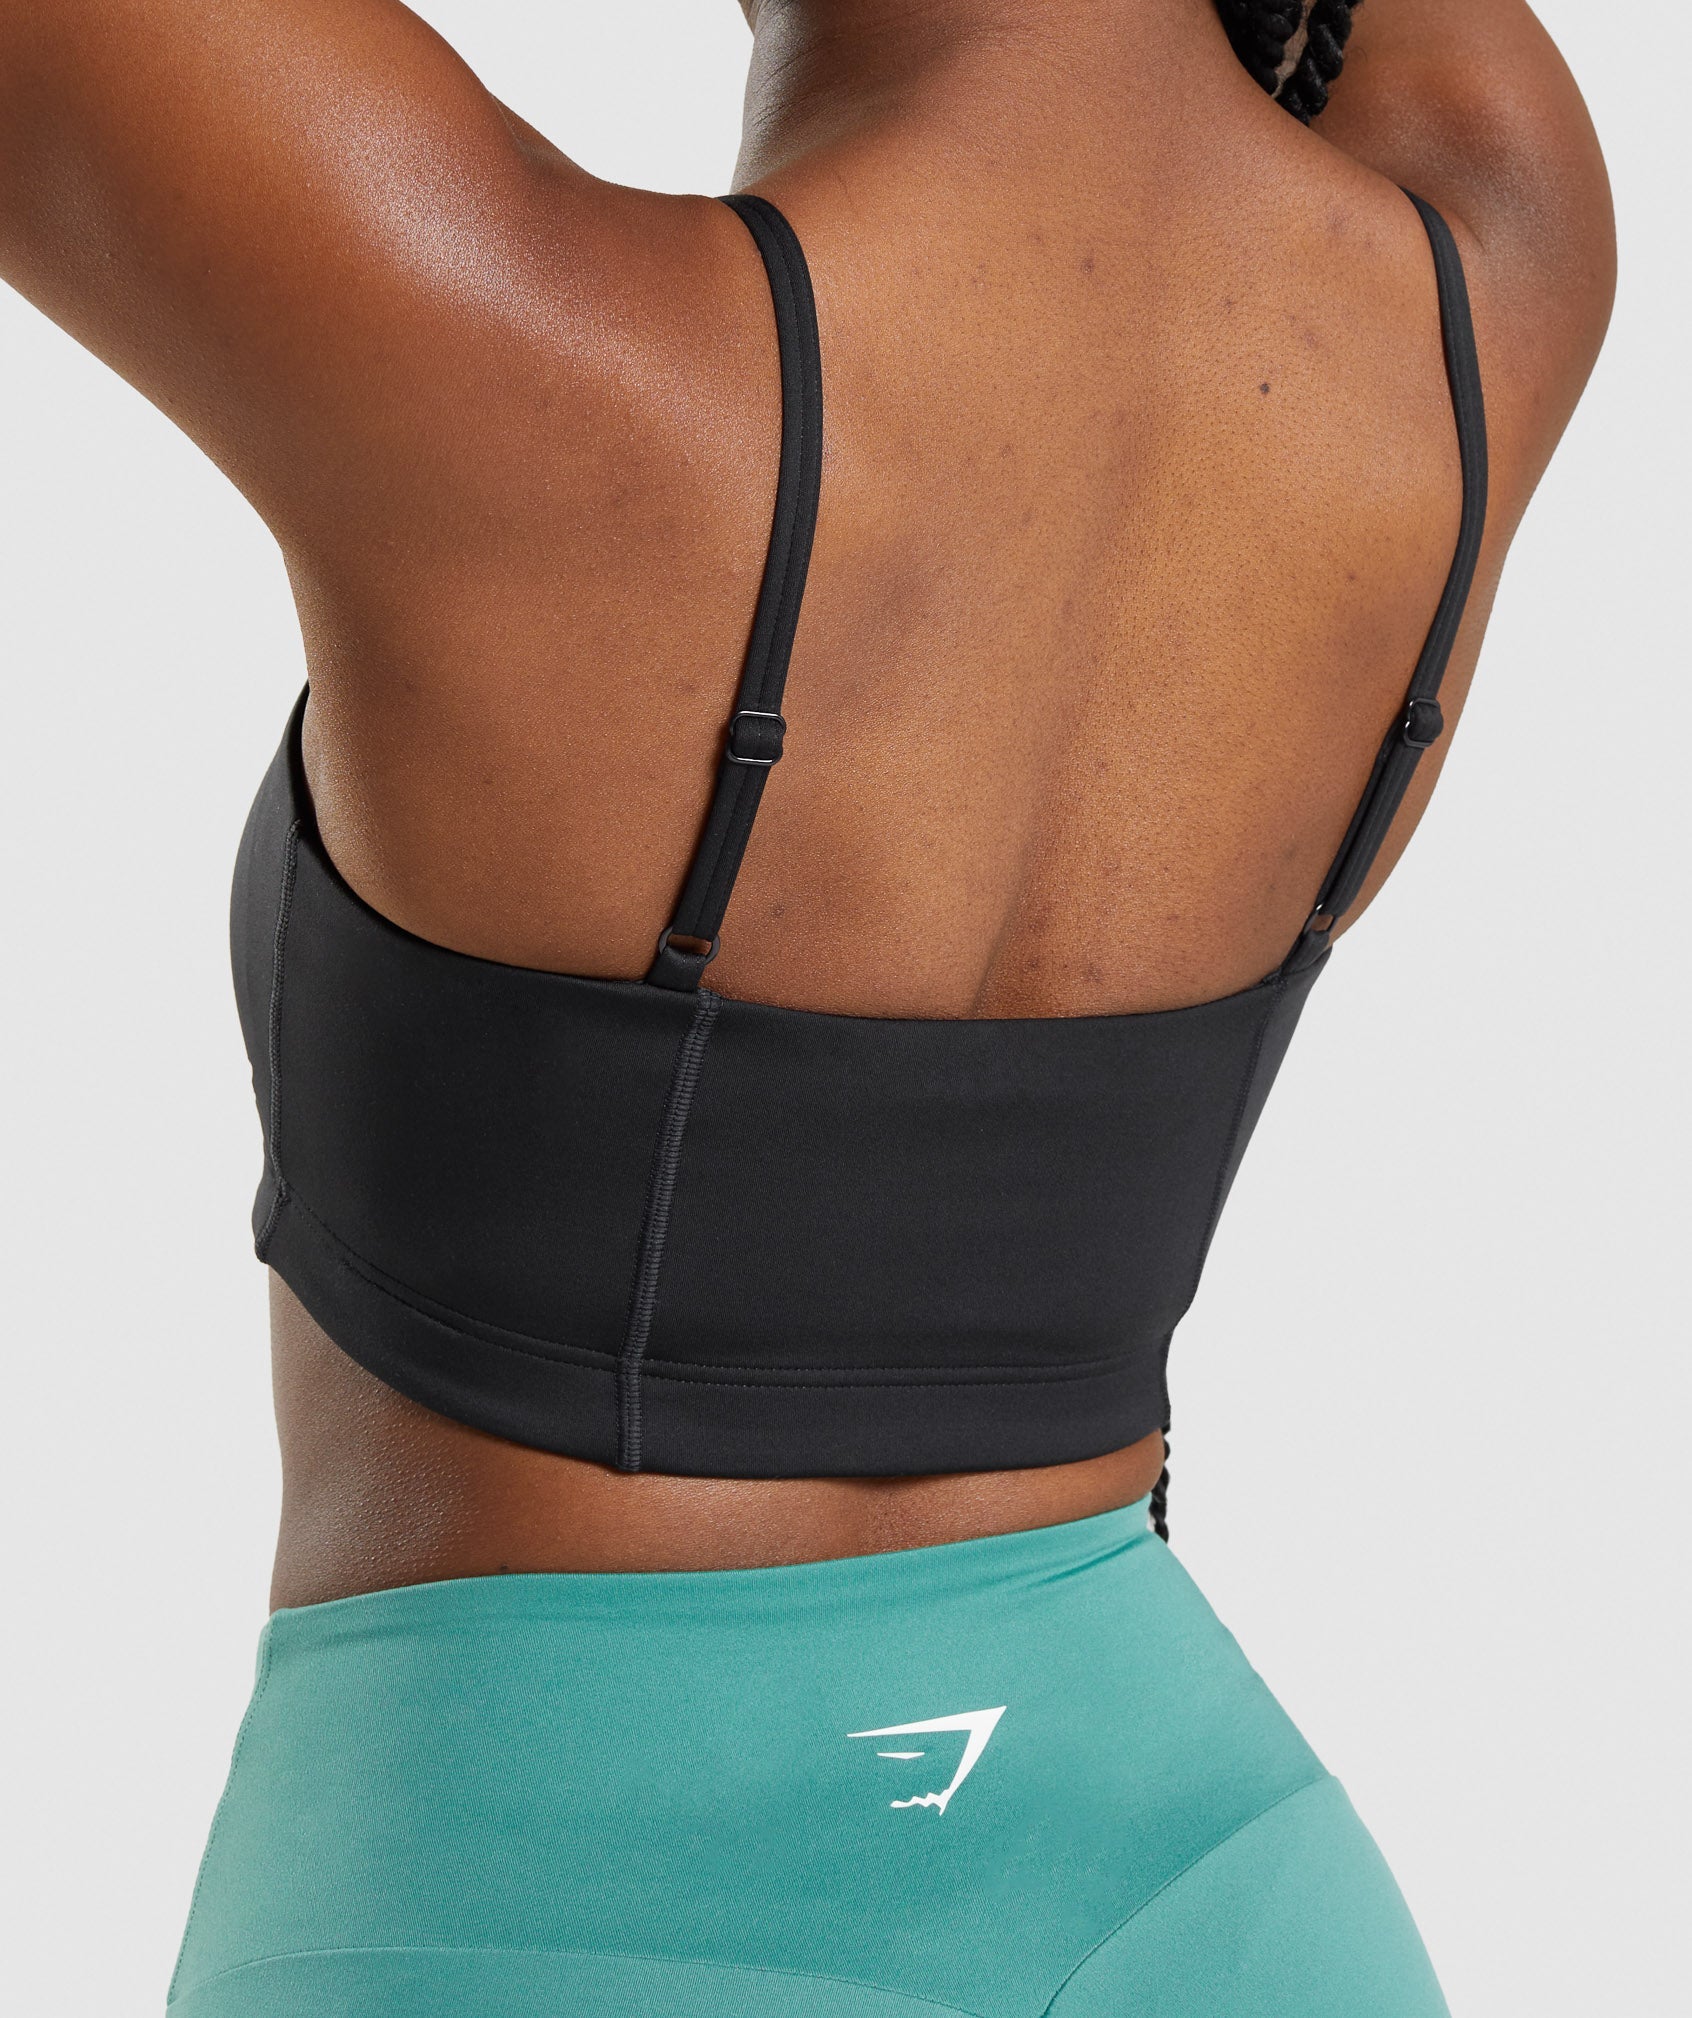 Gymshark Apex Limit Seamless Ruched Sports Bra - Black/Washed